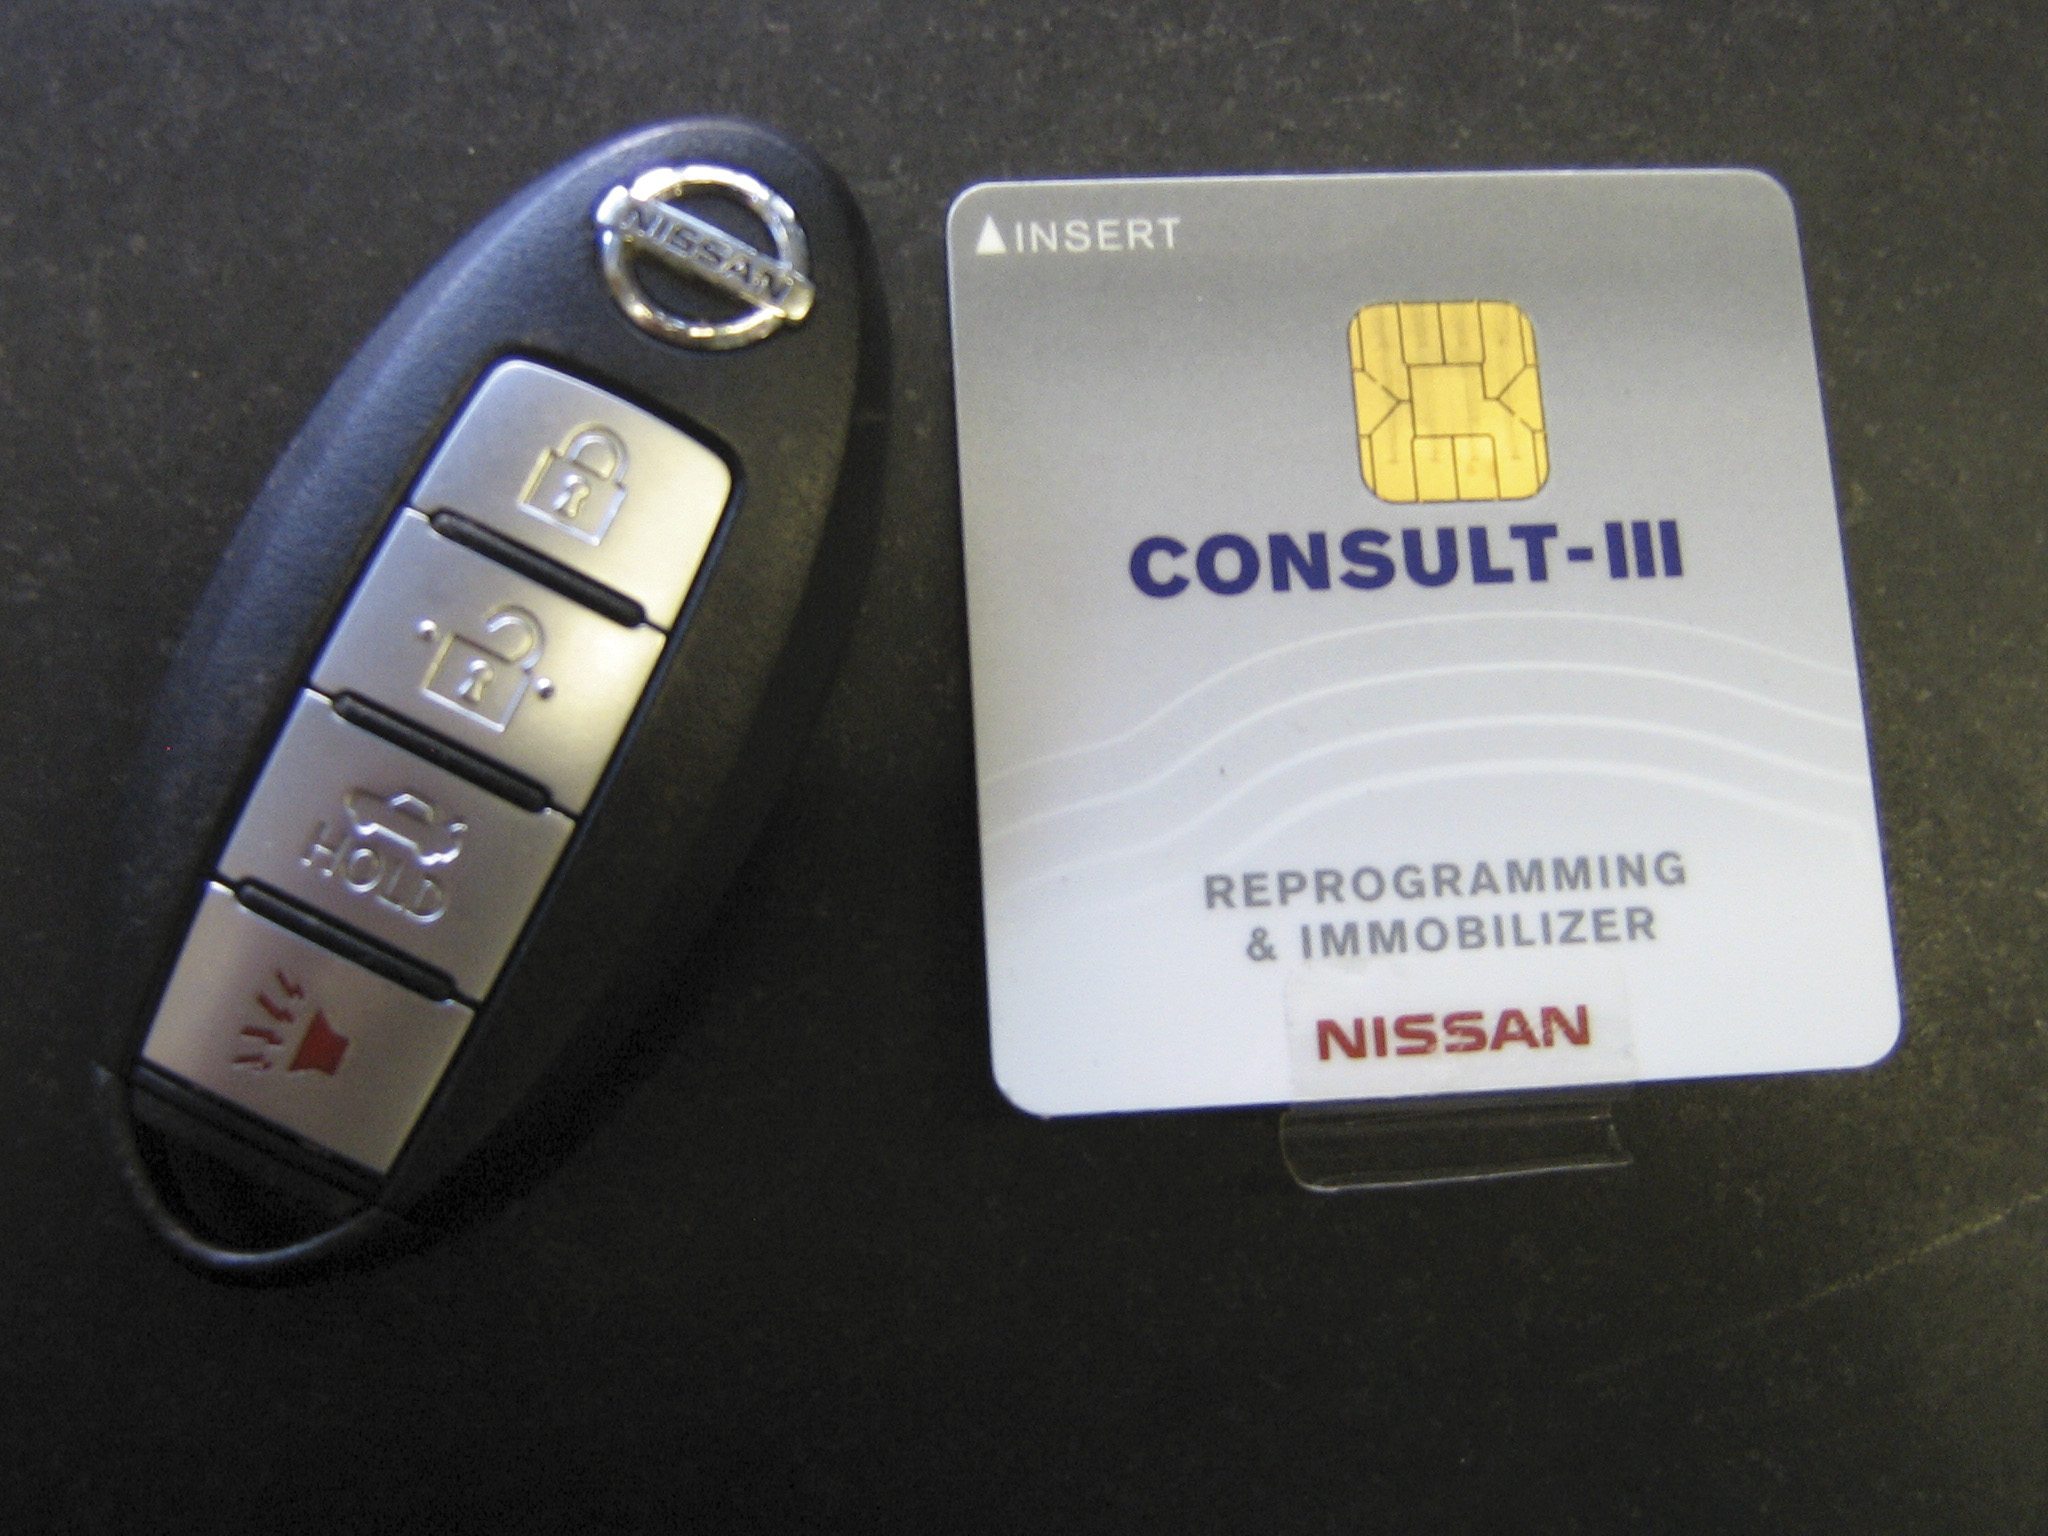 The CONSULT III plus will require an appropriate immobilizer unlock card to do work with Intelligent Keys.